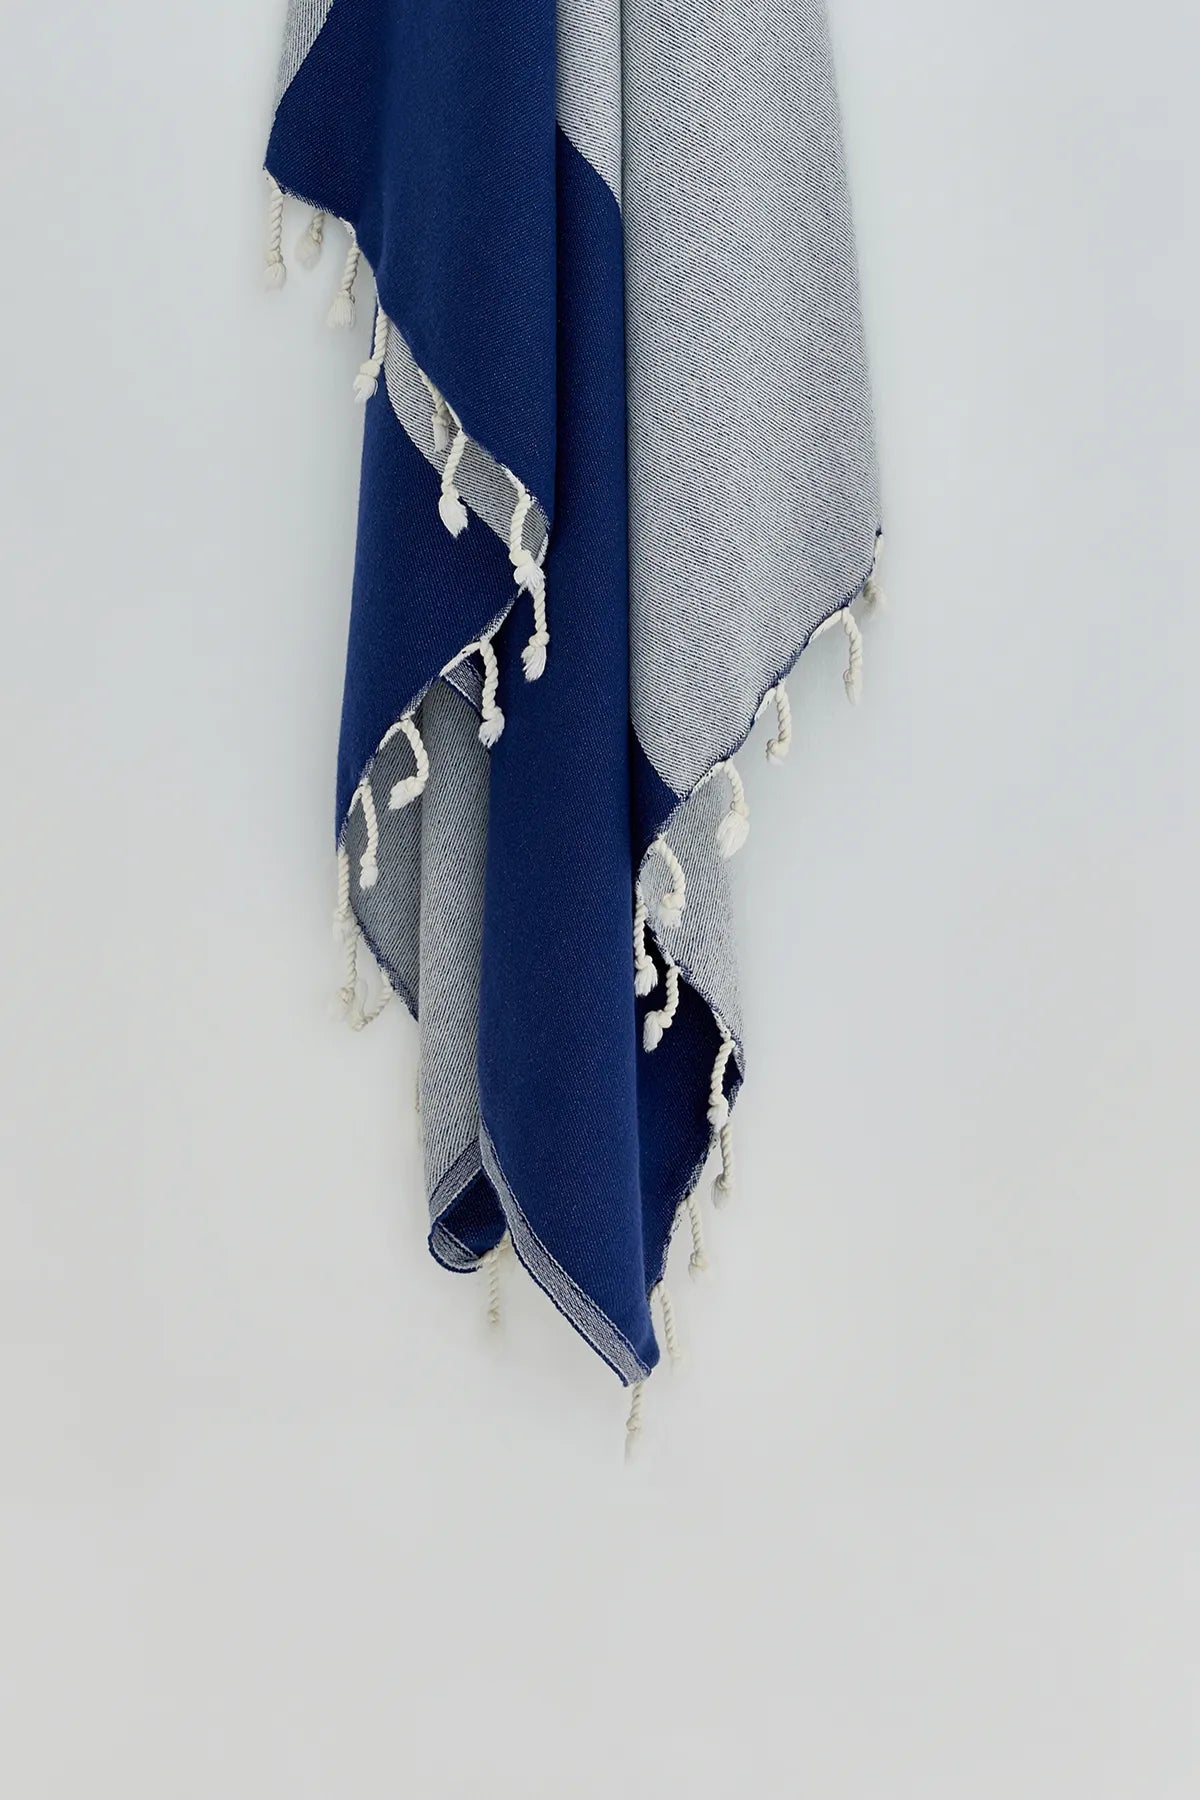 Beach/Bath,Indigo,Turkish towel,detailed,summer,line patterned,double-faces,purified sand,light,compact, easy pack,fun, recycled